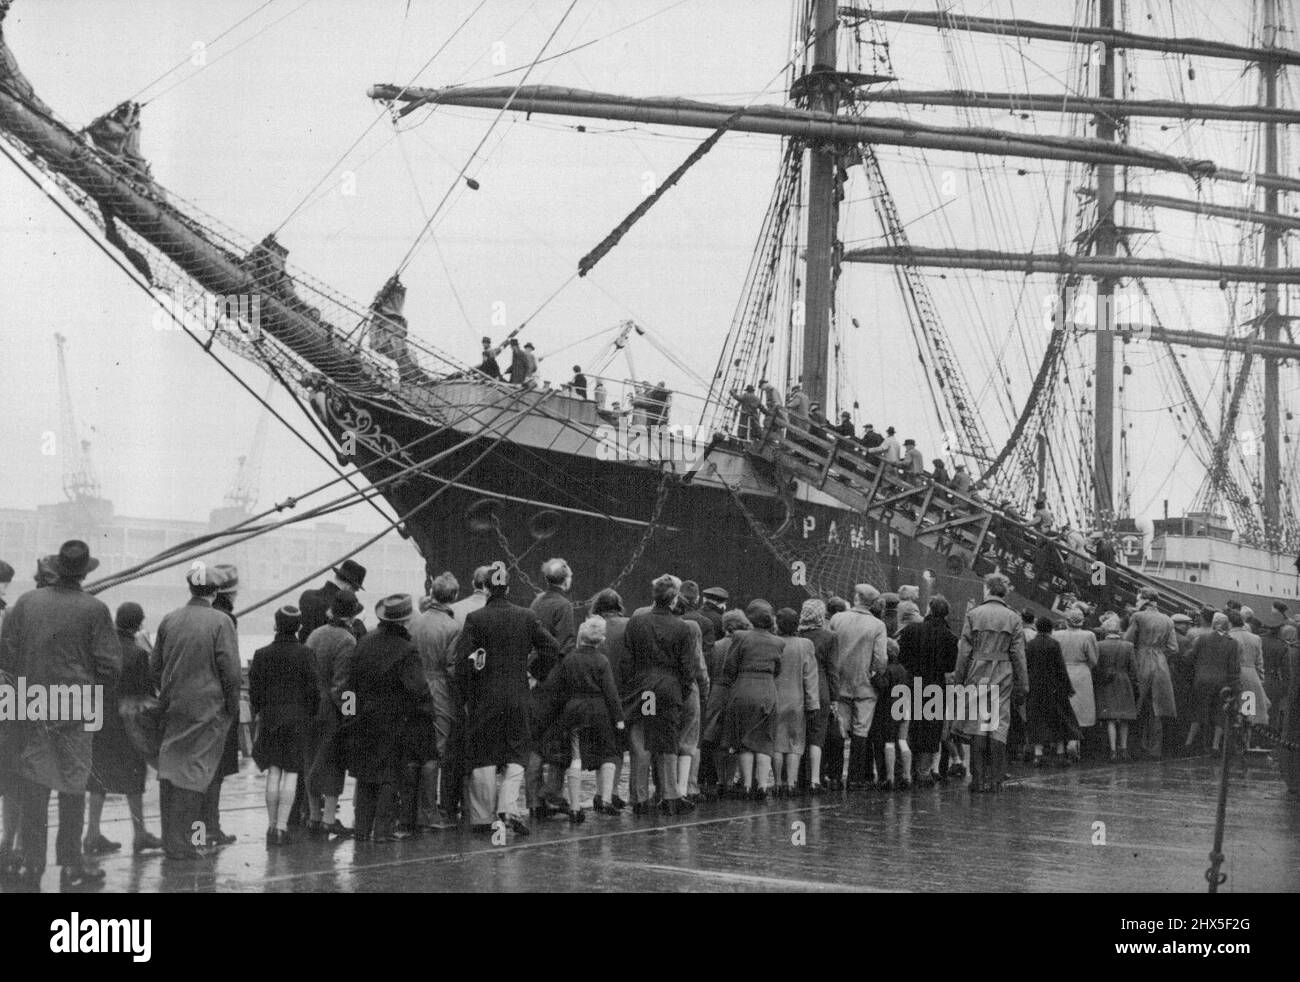 Londoners See The 'Pamir' The long queue waiting to go aboard the 'Pamir'. The four-masted barque 'Pamir' just arrived in London after her 80 day voyage from New Zealand, has now been thrown open to the public, and despite the bad weather, many hundreds of Londoners visited the famous sailing ship in the Victoria Dock. December 29, 1947. (Photo by Sport & General Press Agency, Limited). Stock Photo